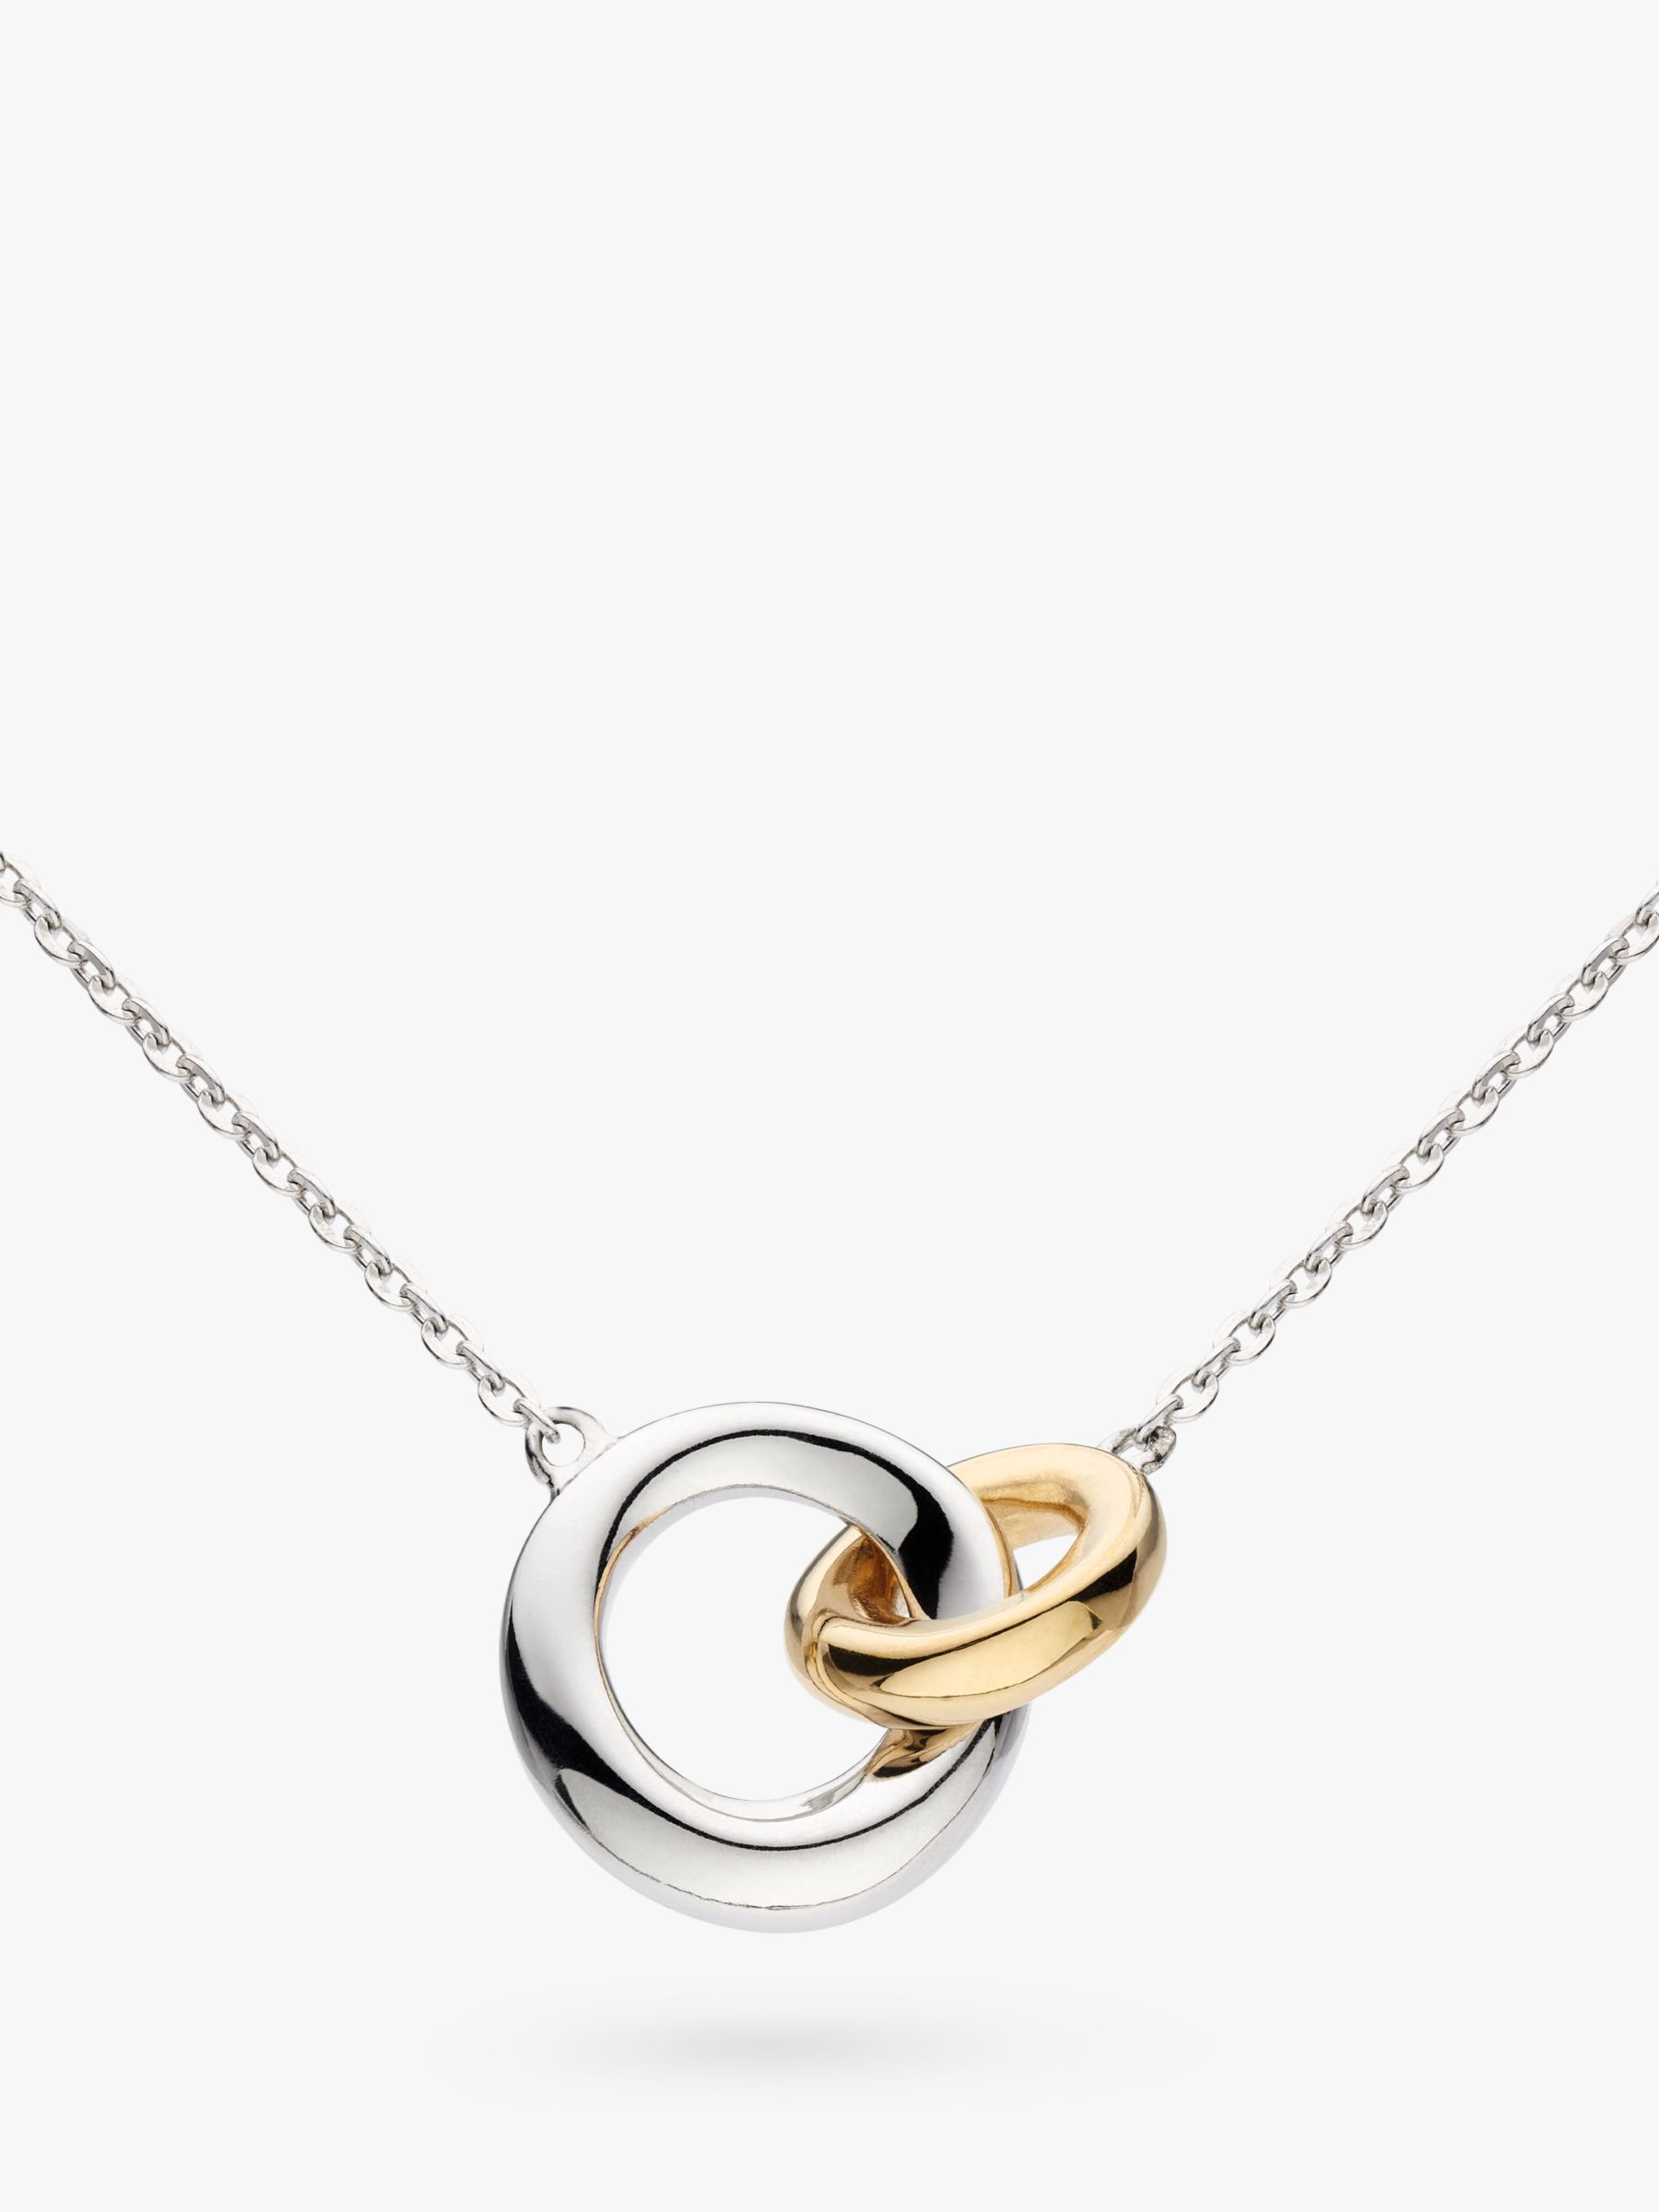 Kit Heath Bevel Cirque Link Chain Necklace, Silver/Gold at John Lewis ...